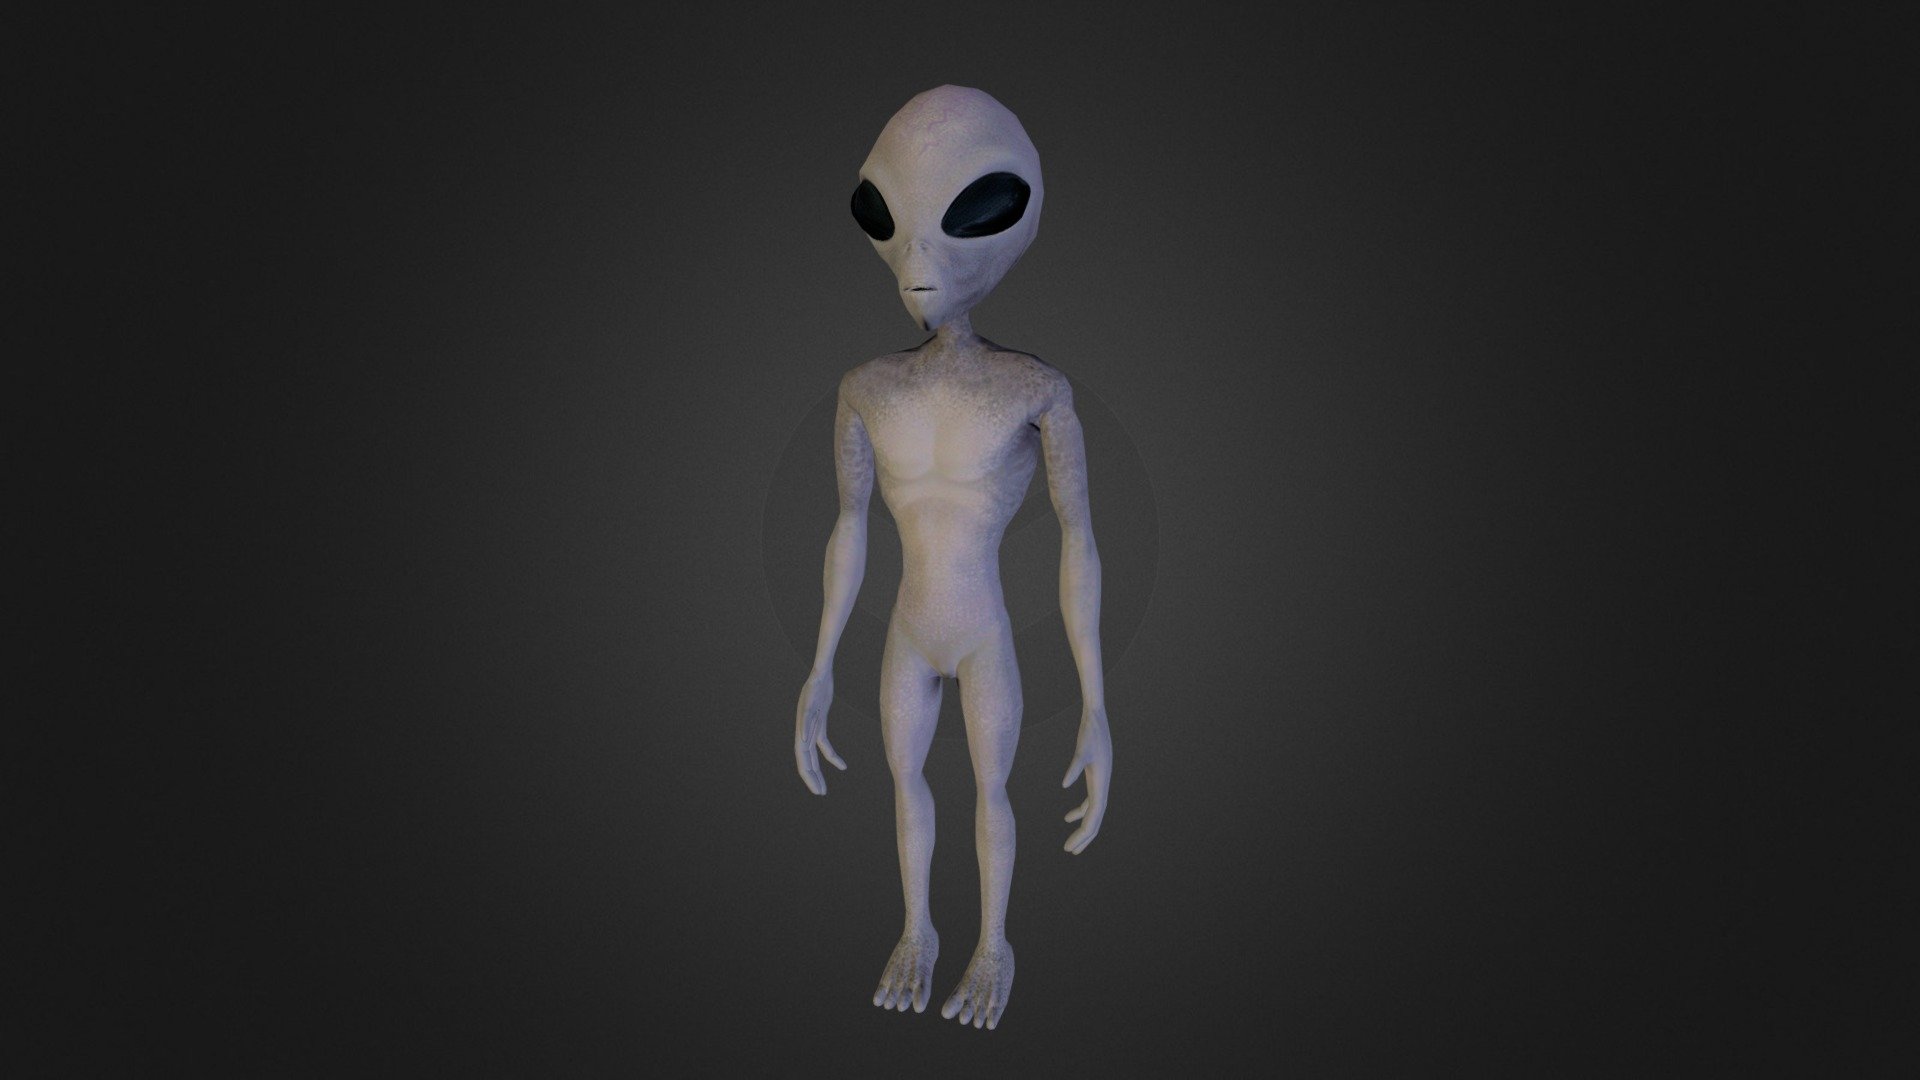 I made this alien as a personal project. Took me about 6 hours to sculpt, retopo, and texture 3d model